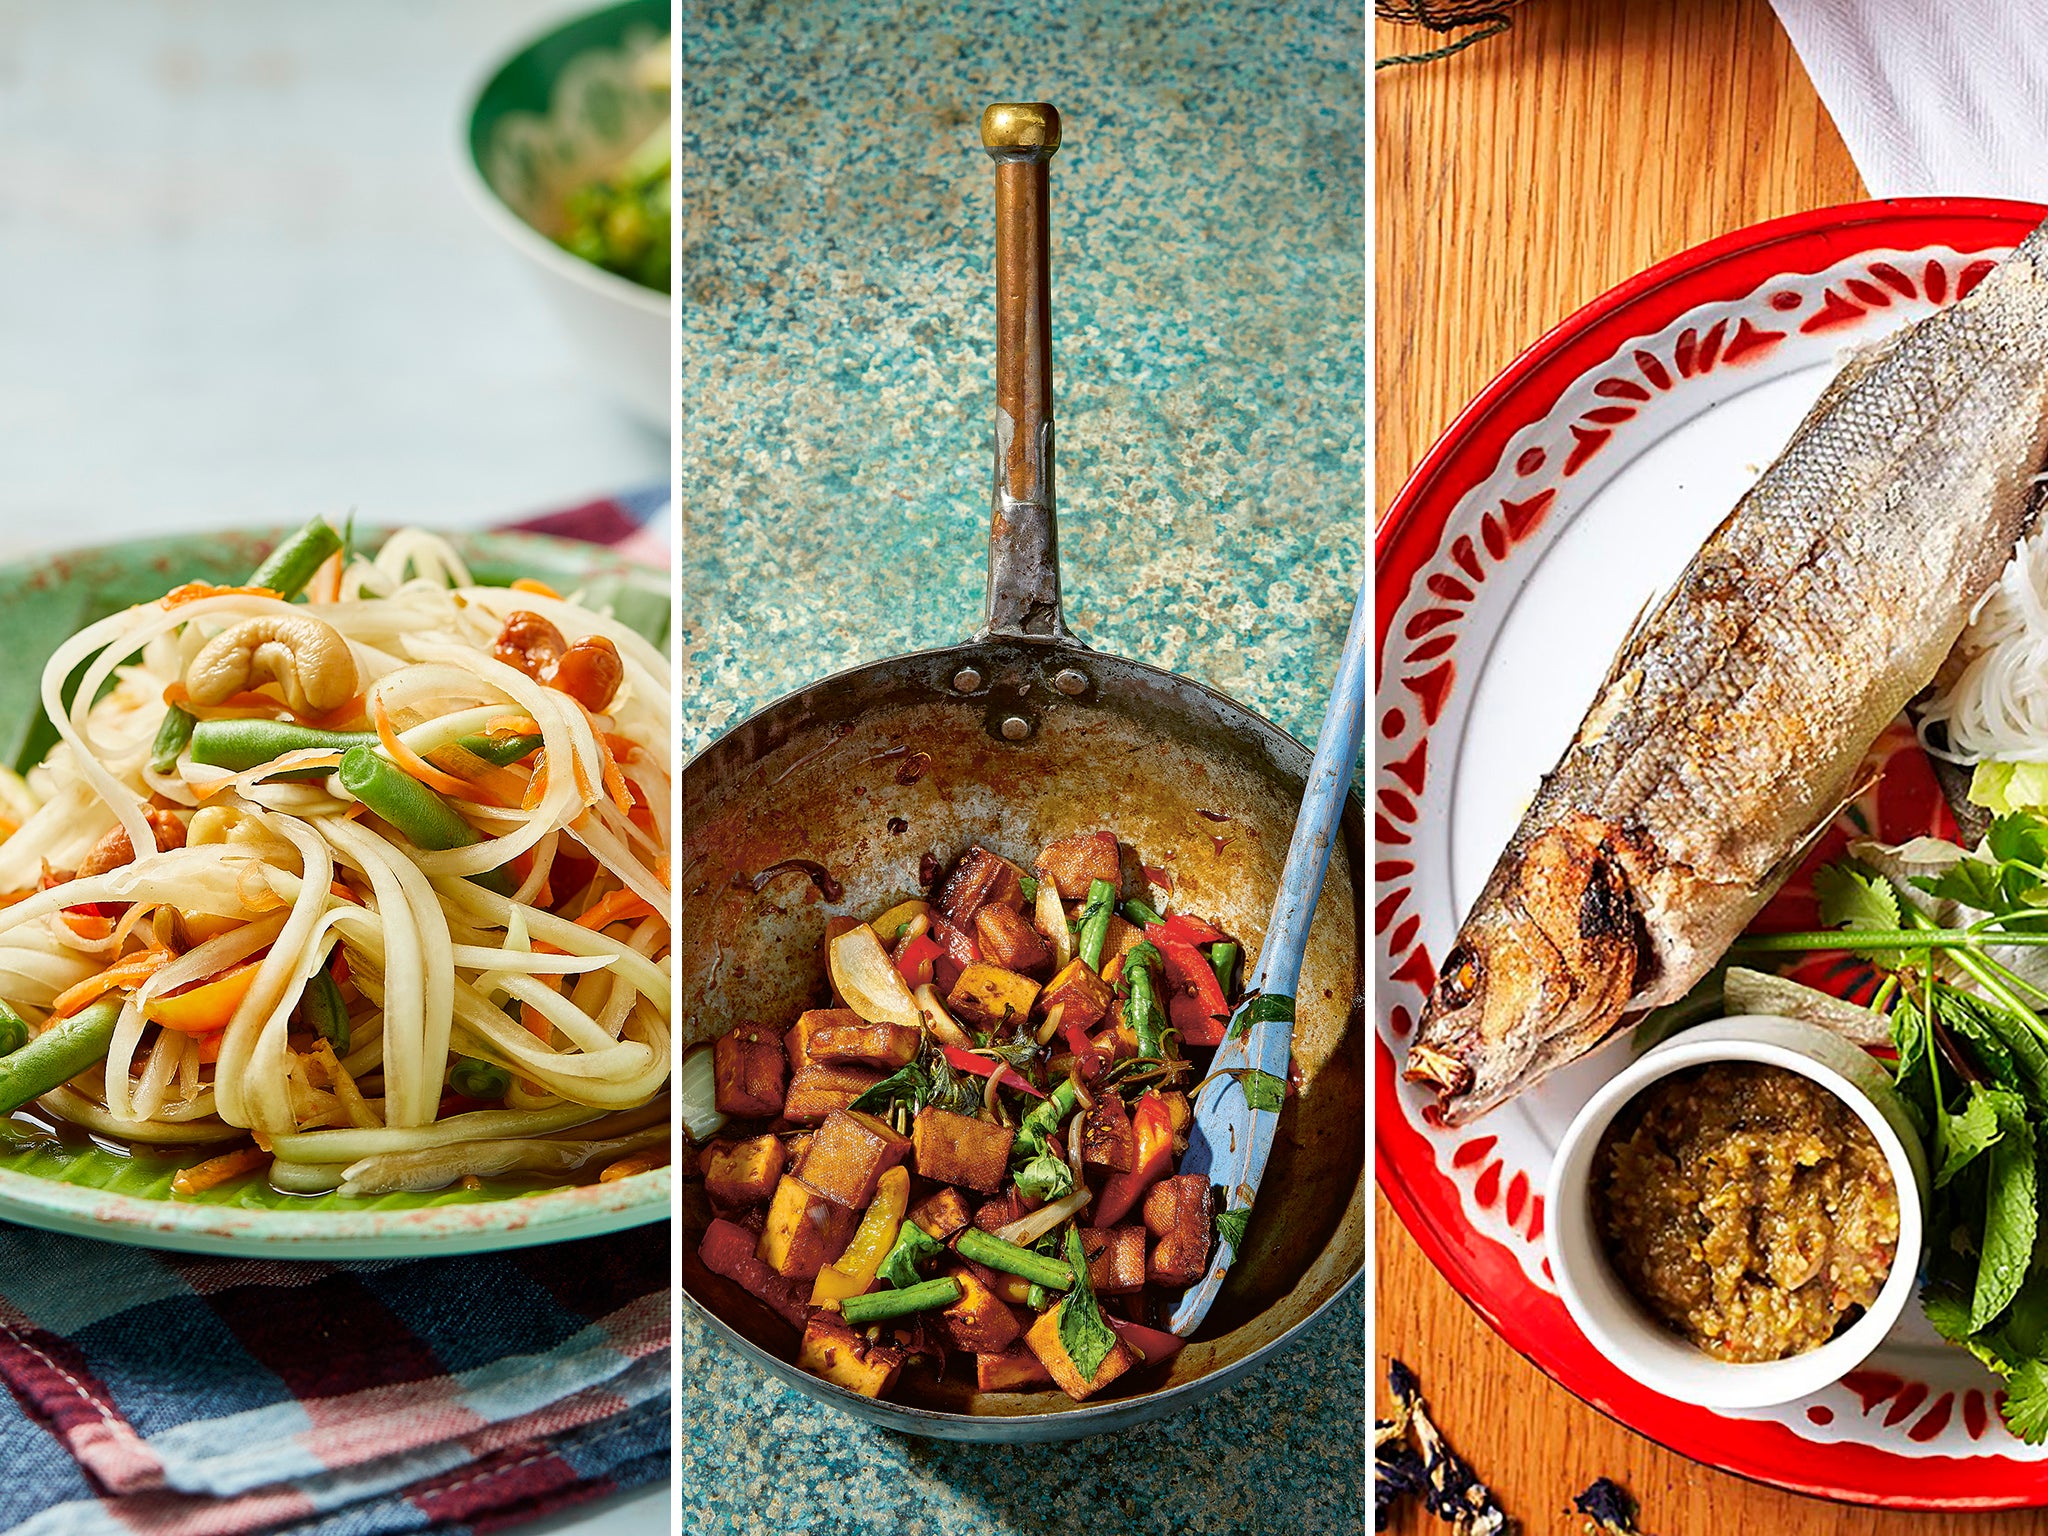 Som tam, pad kra prow and whole grilled sea bass are mainstays on Moore’s menus